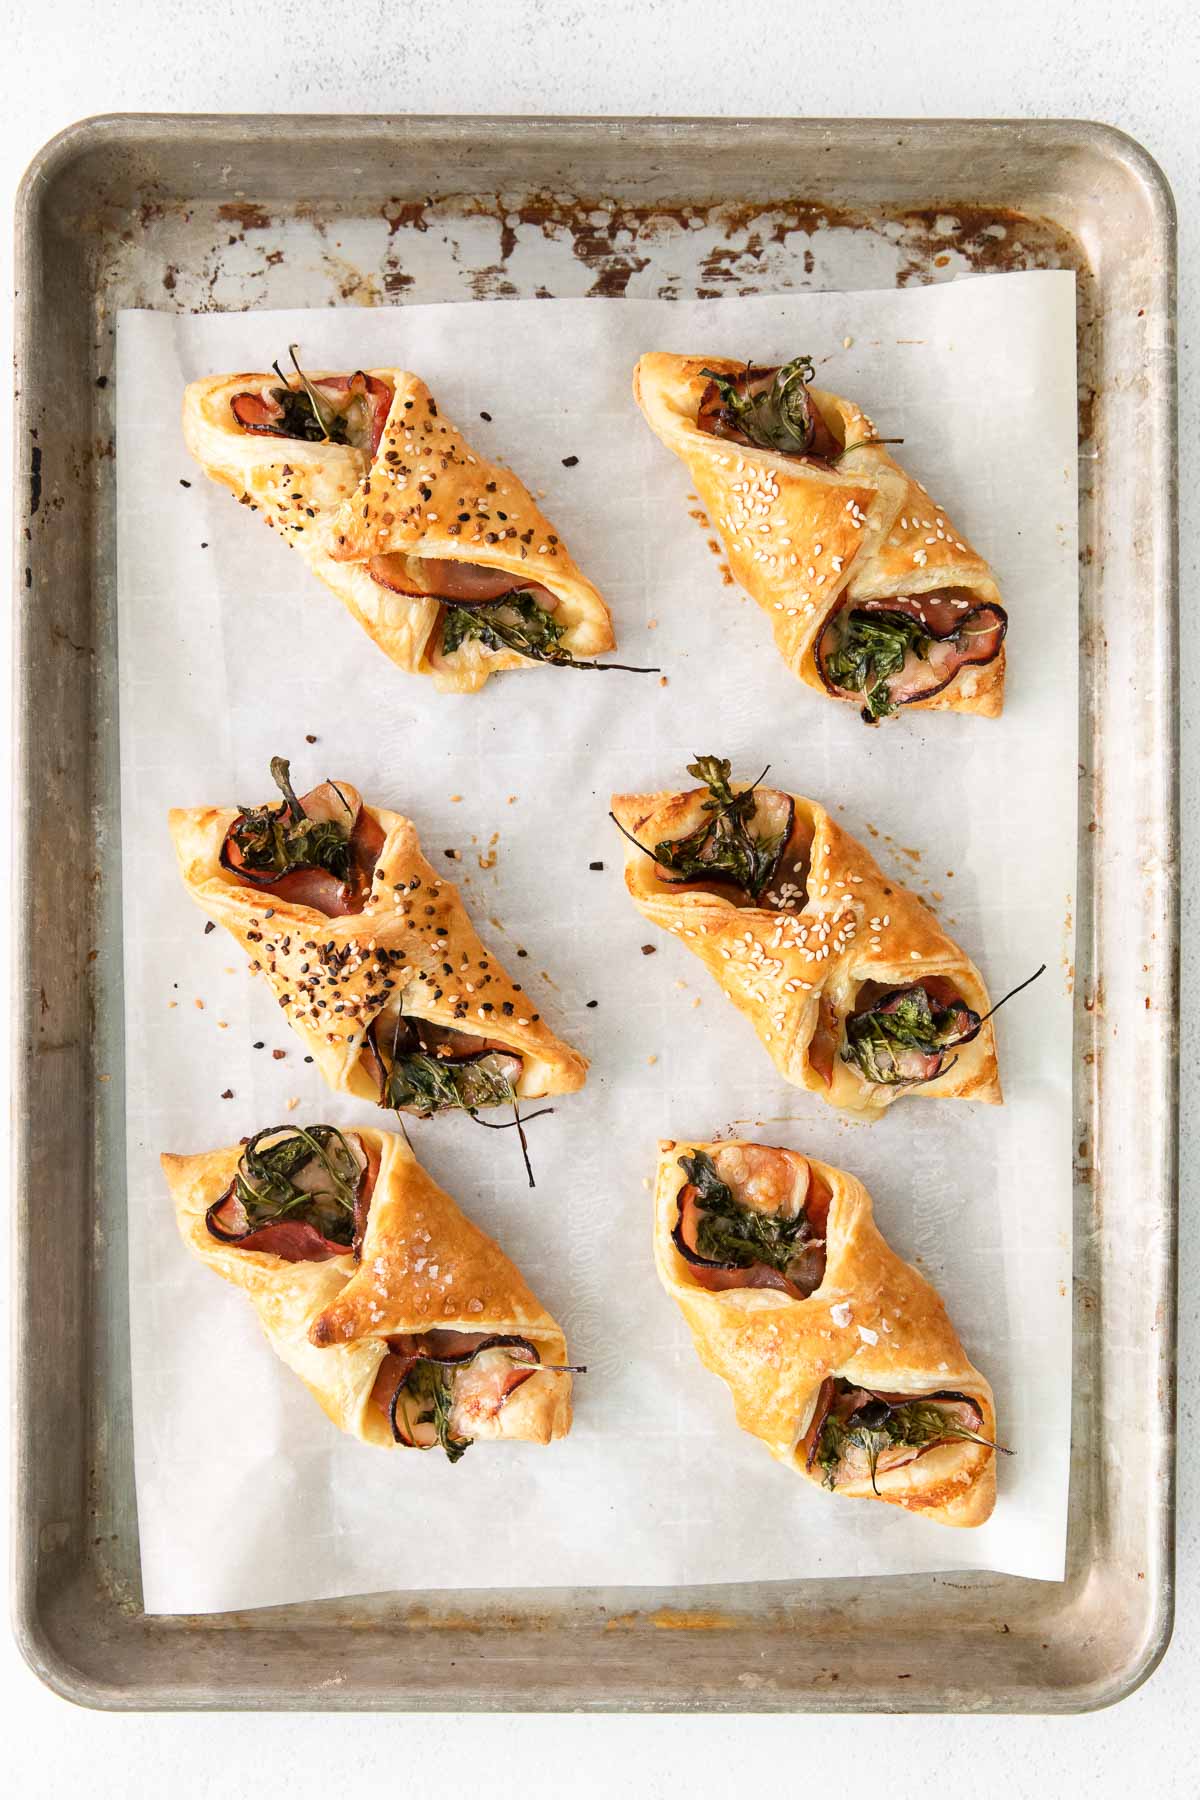 six baked puff pastries with ham and cheese inside on white parchment paper lined baking sheet